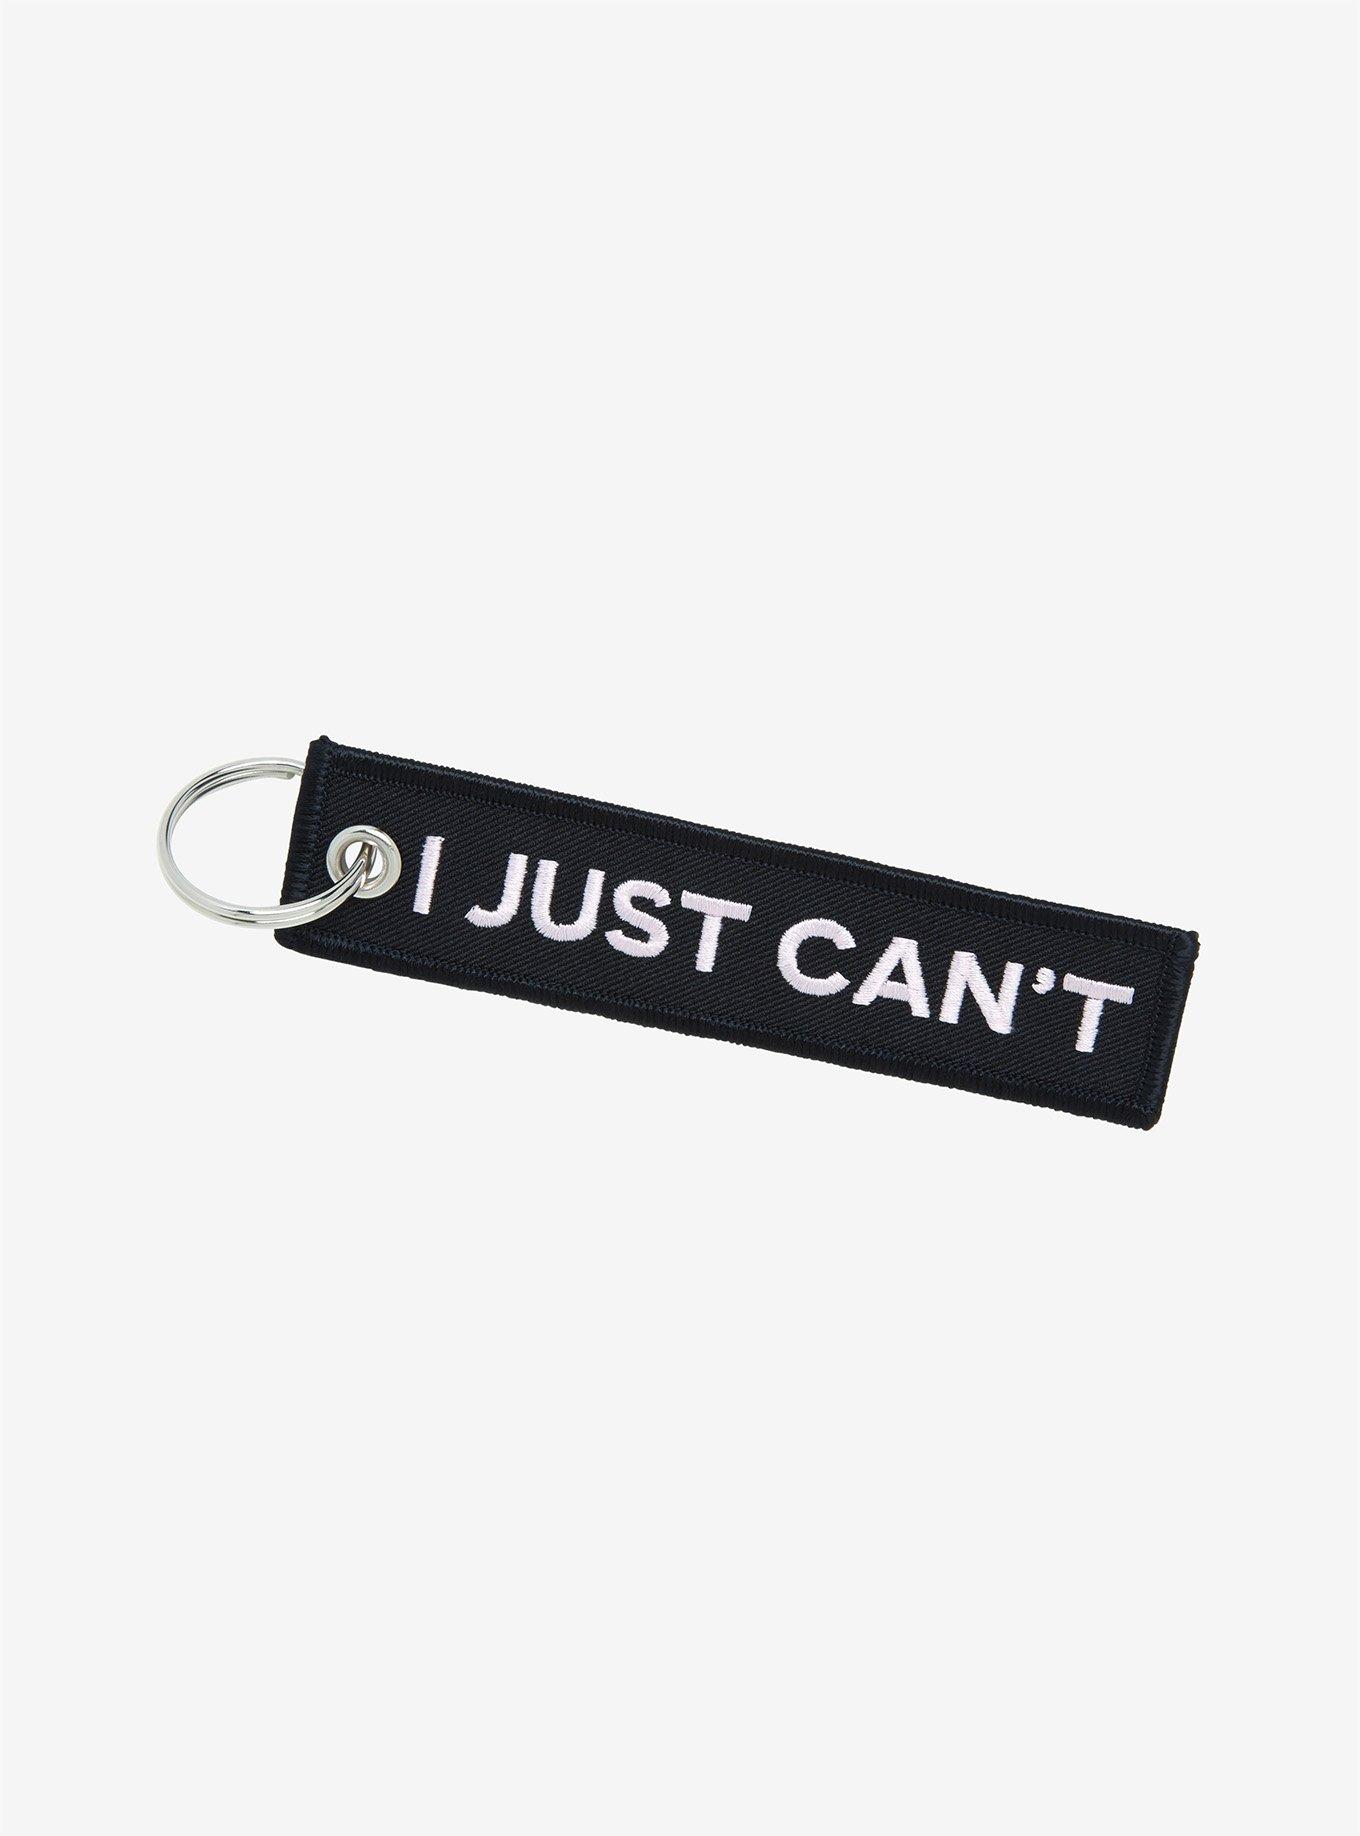 I Just Can't Fabric Key Chain, , hi-res